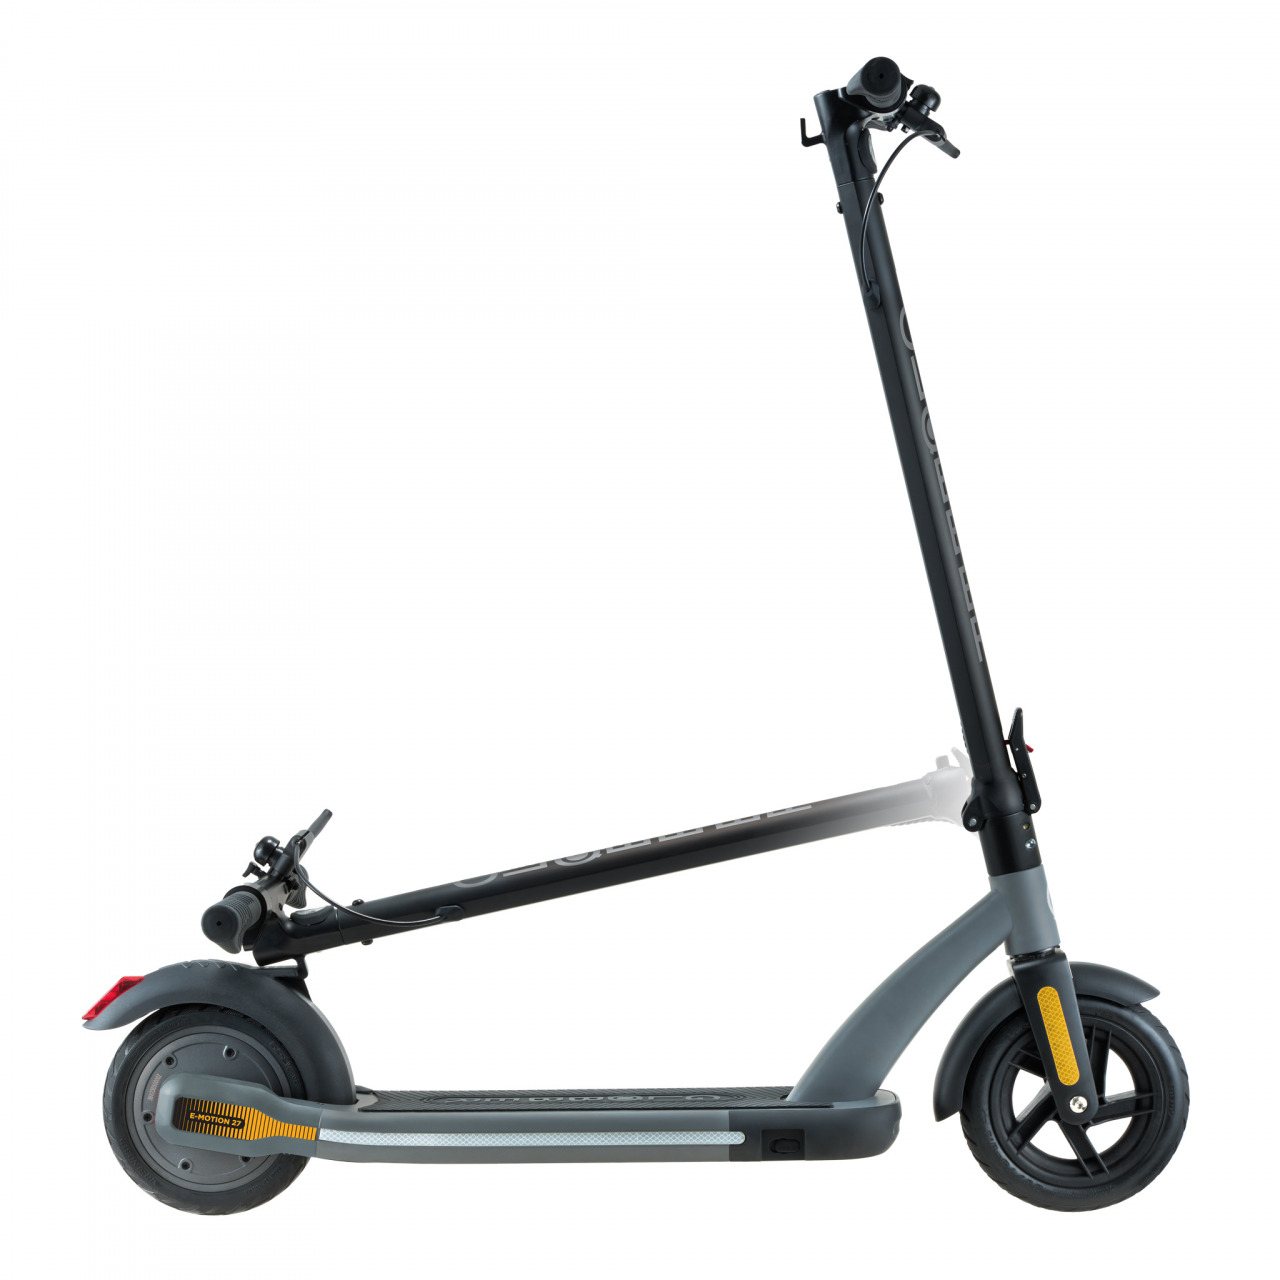 752 199 Foldable Adult Electric Scooter